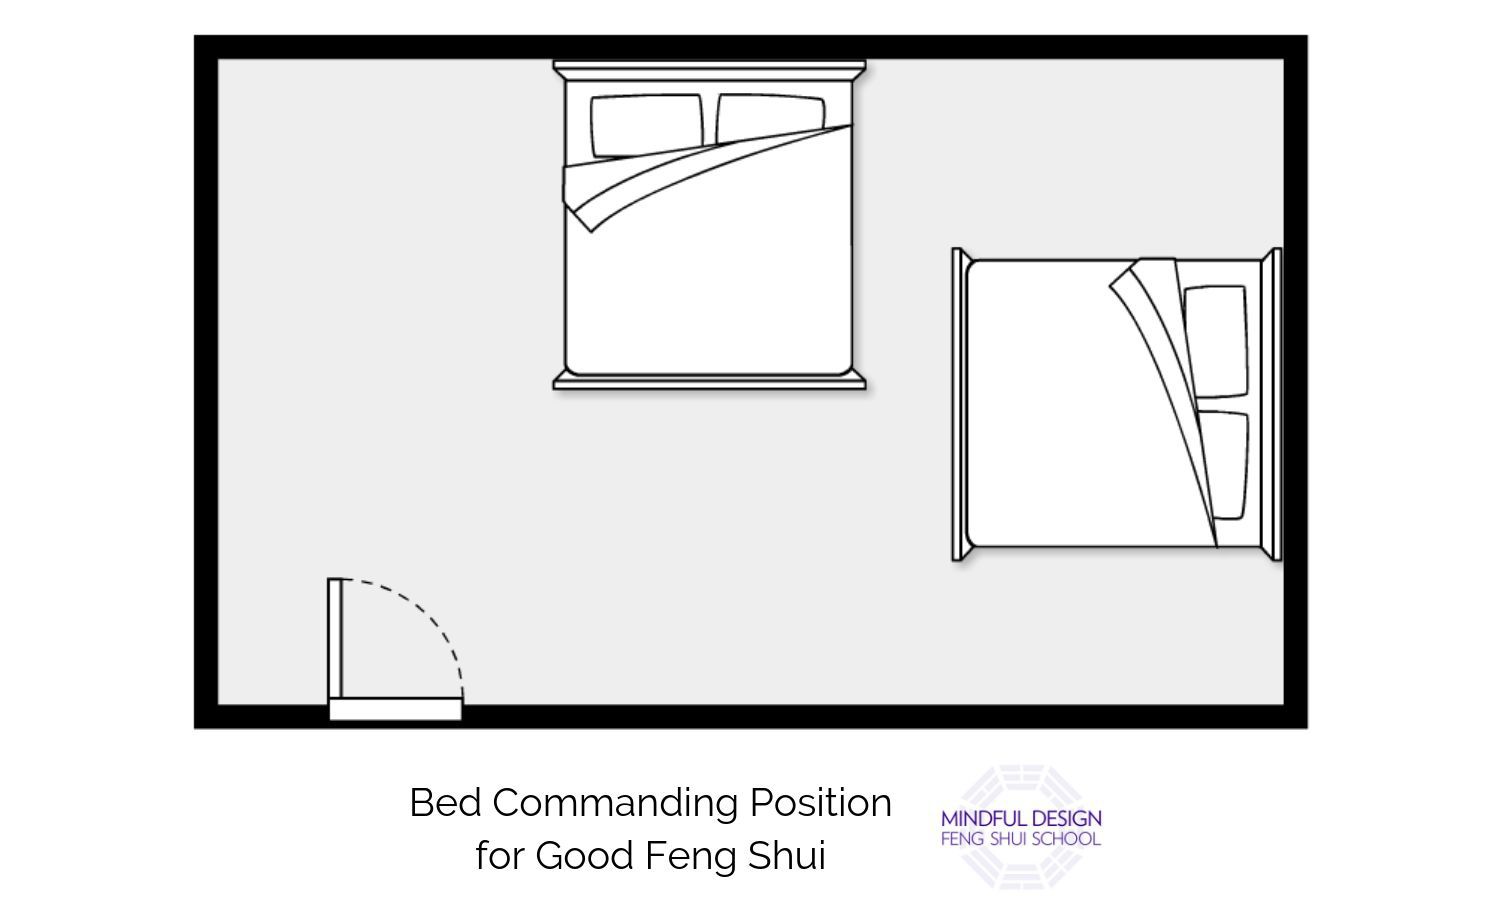 1. Avoid placing your bed against a wall that is shared with a bathroom